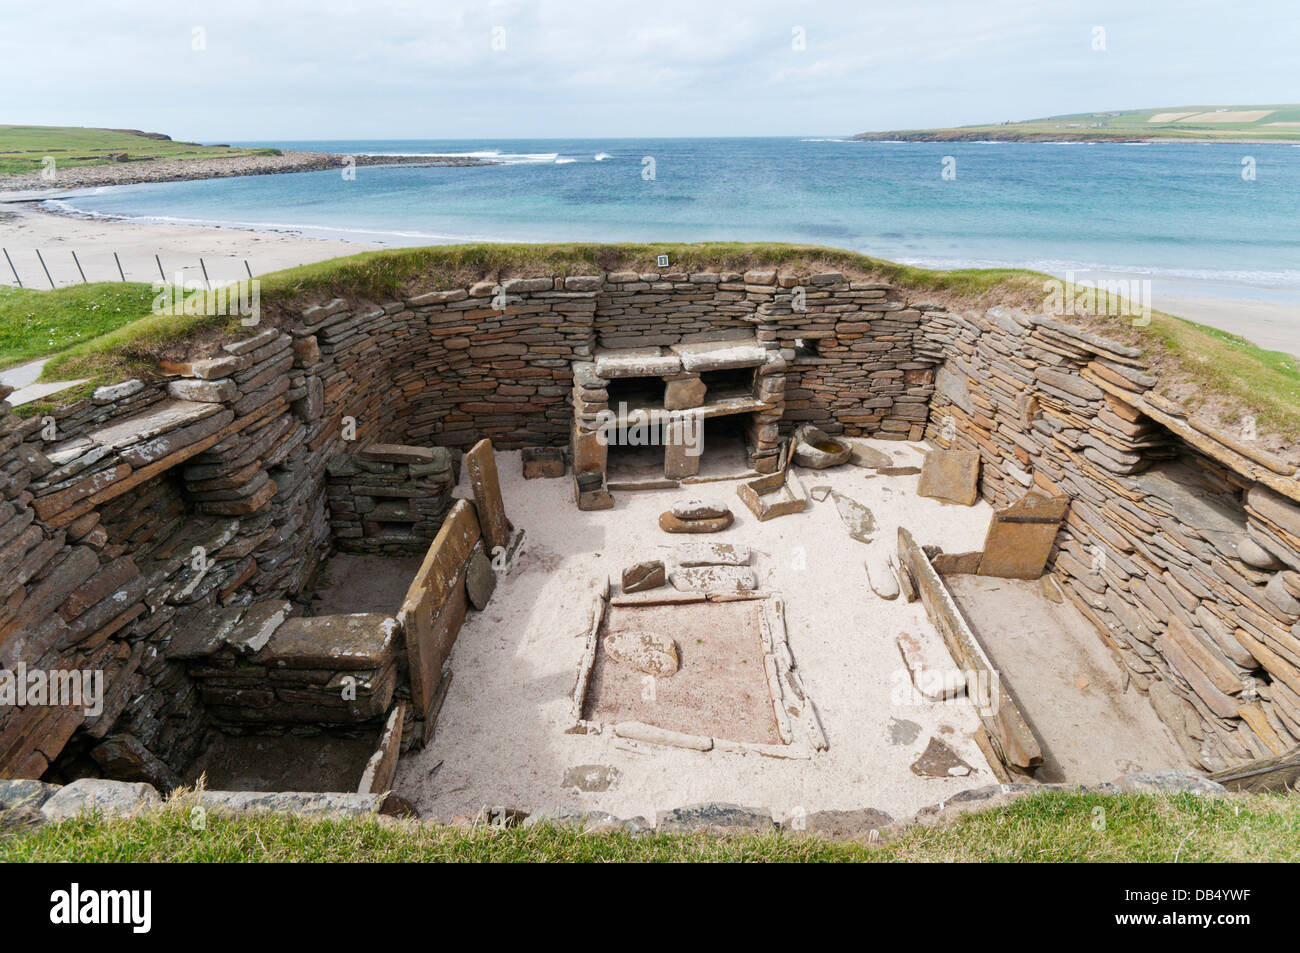 House 1 at Skara Brae Neolithic Village on Mainland Orkney with the Bay of Skaill in the background. Stock Photo